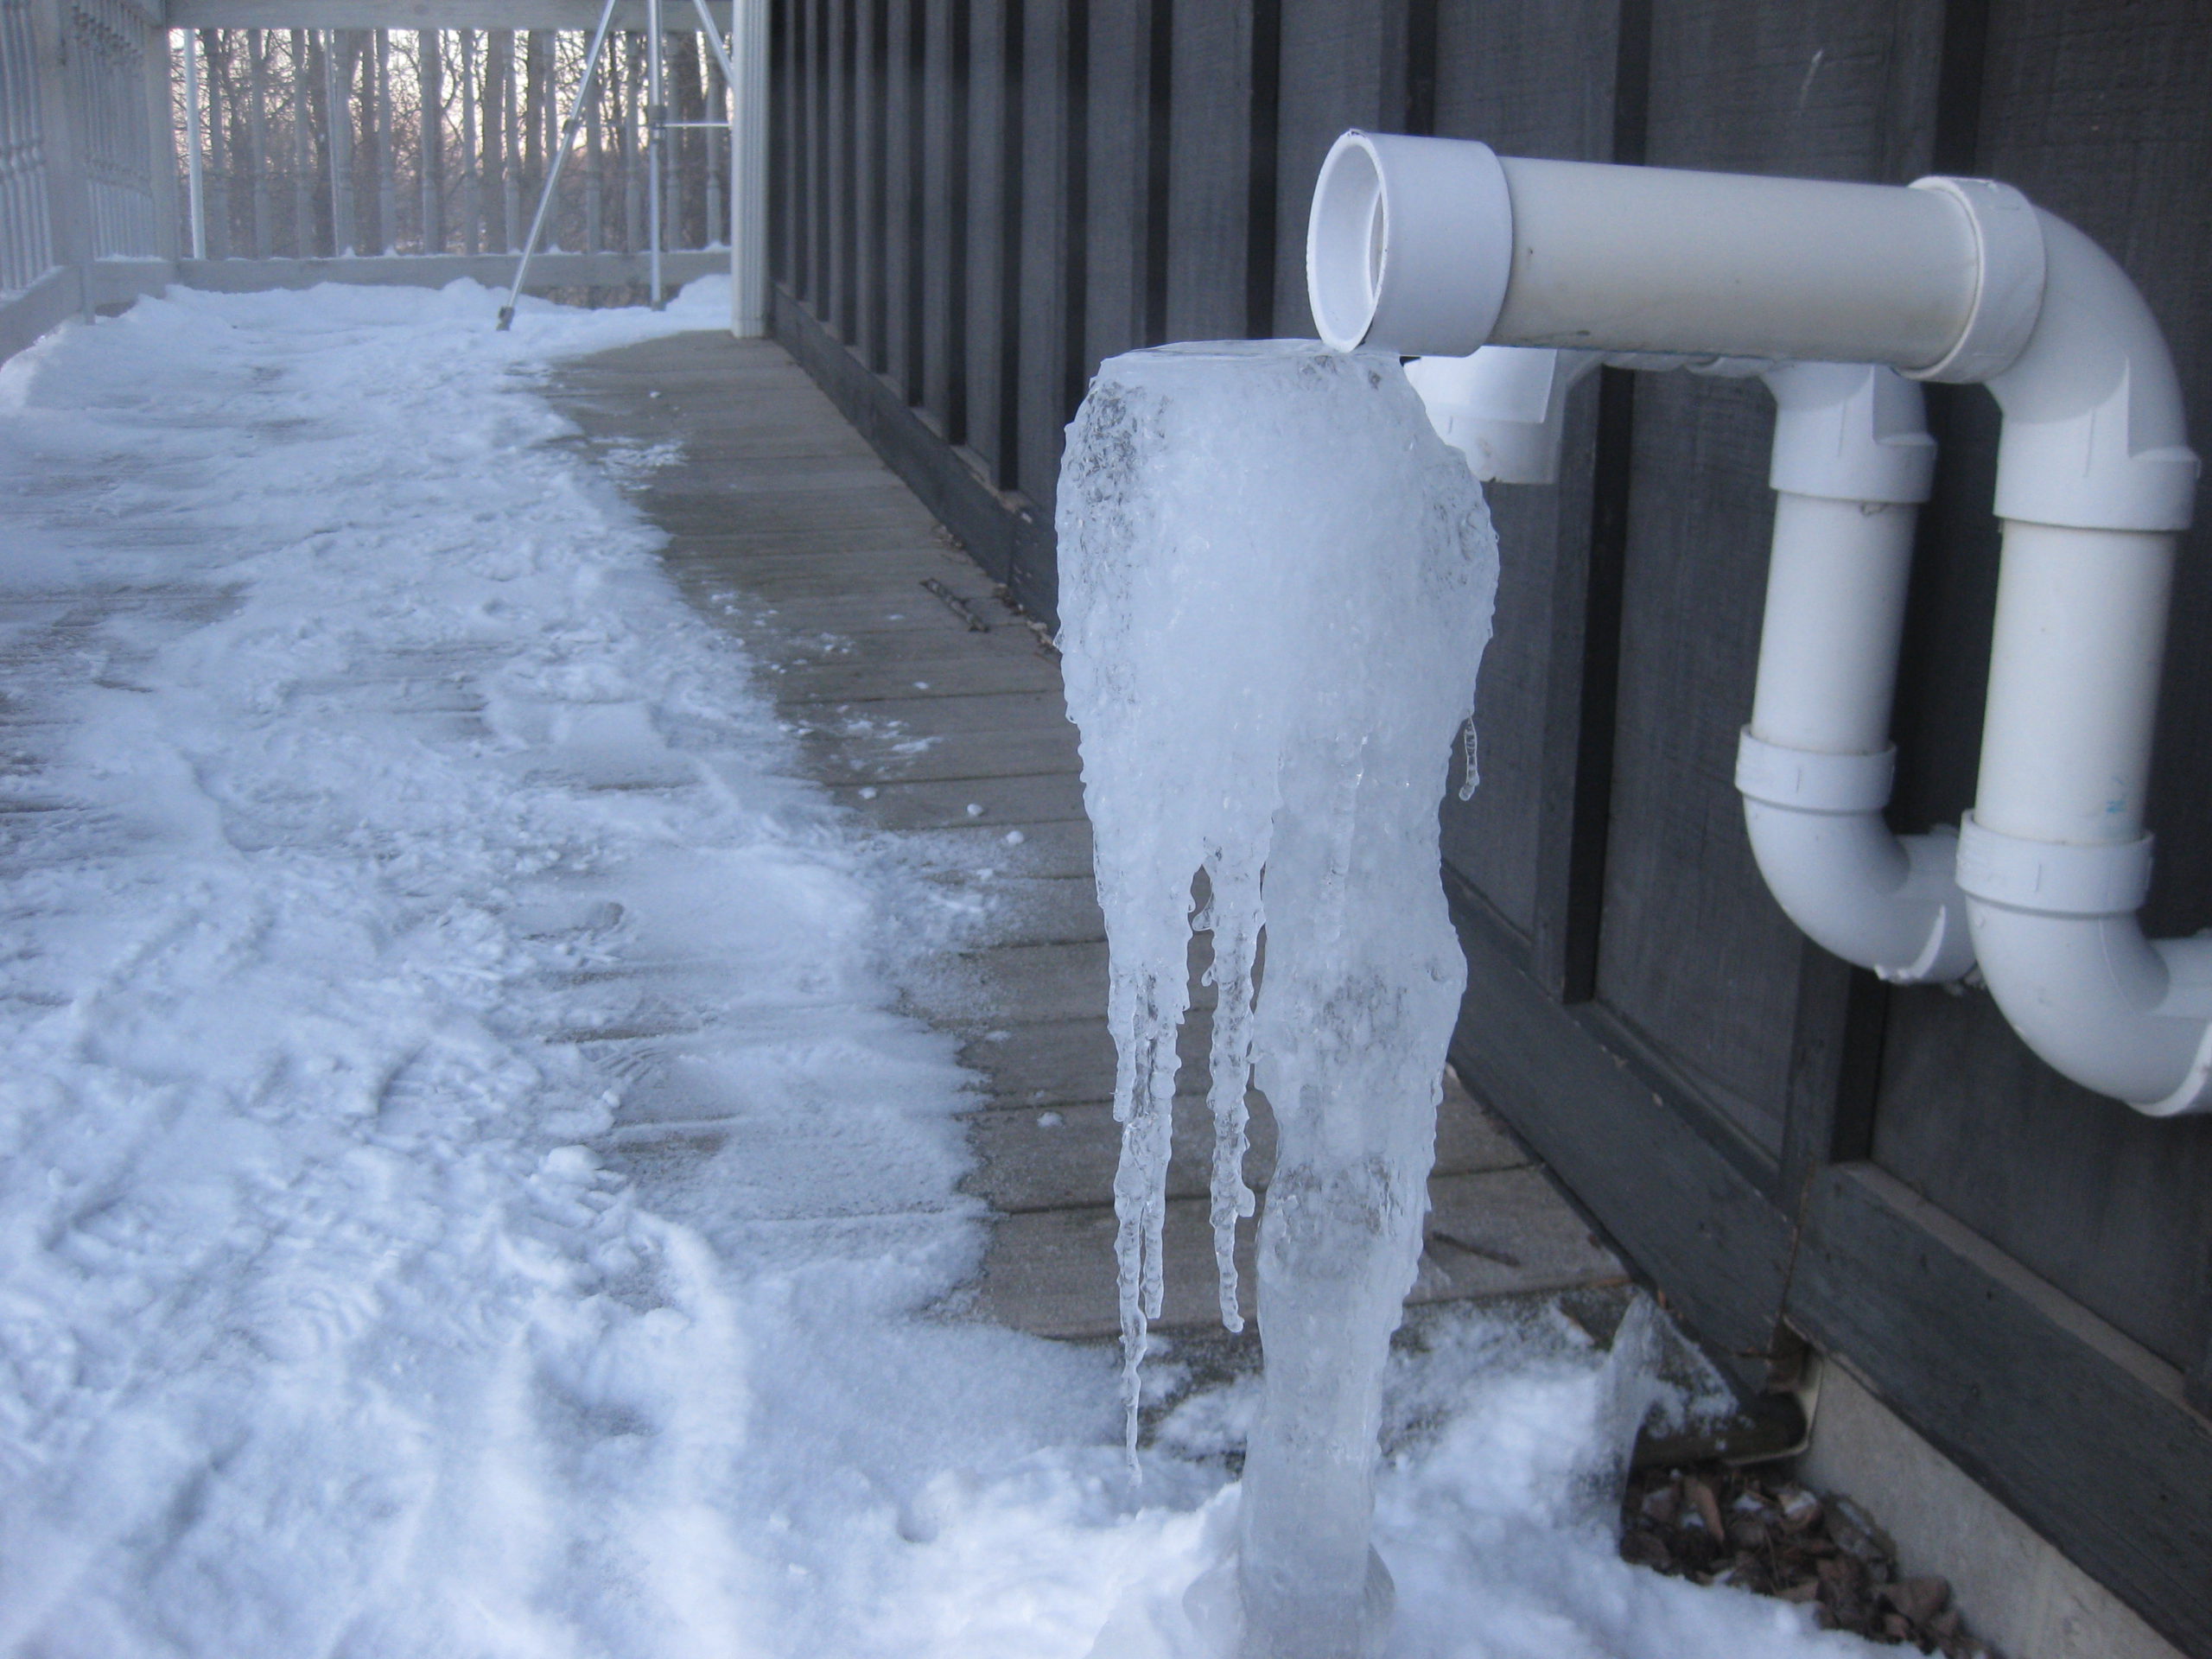 check-for-ice-buildup-on-household-natural-gas-vents-saskenergy-my